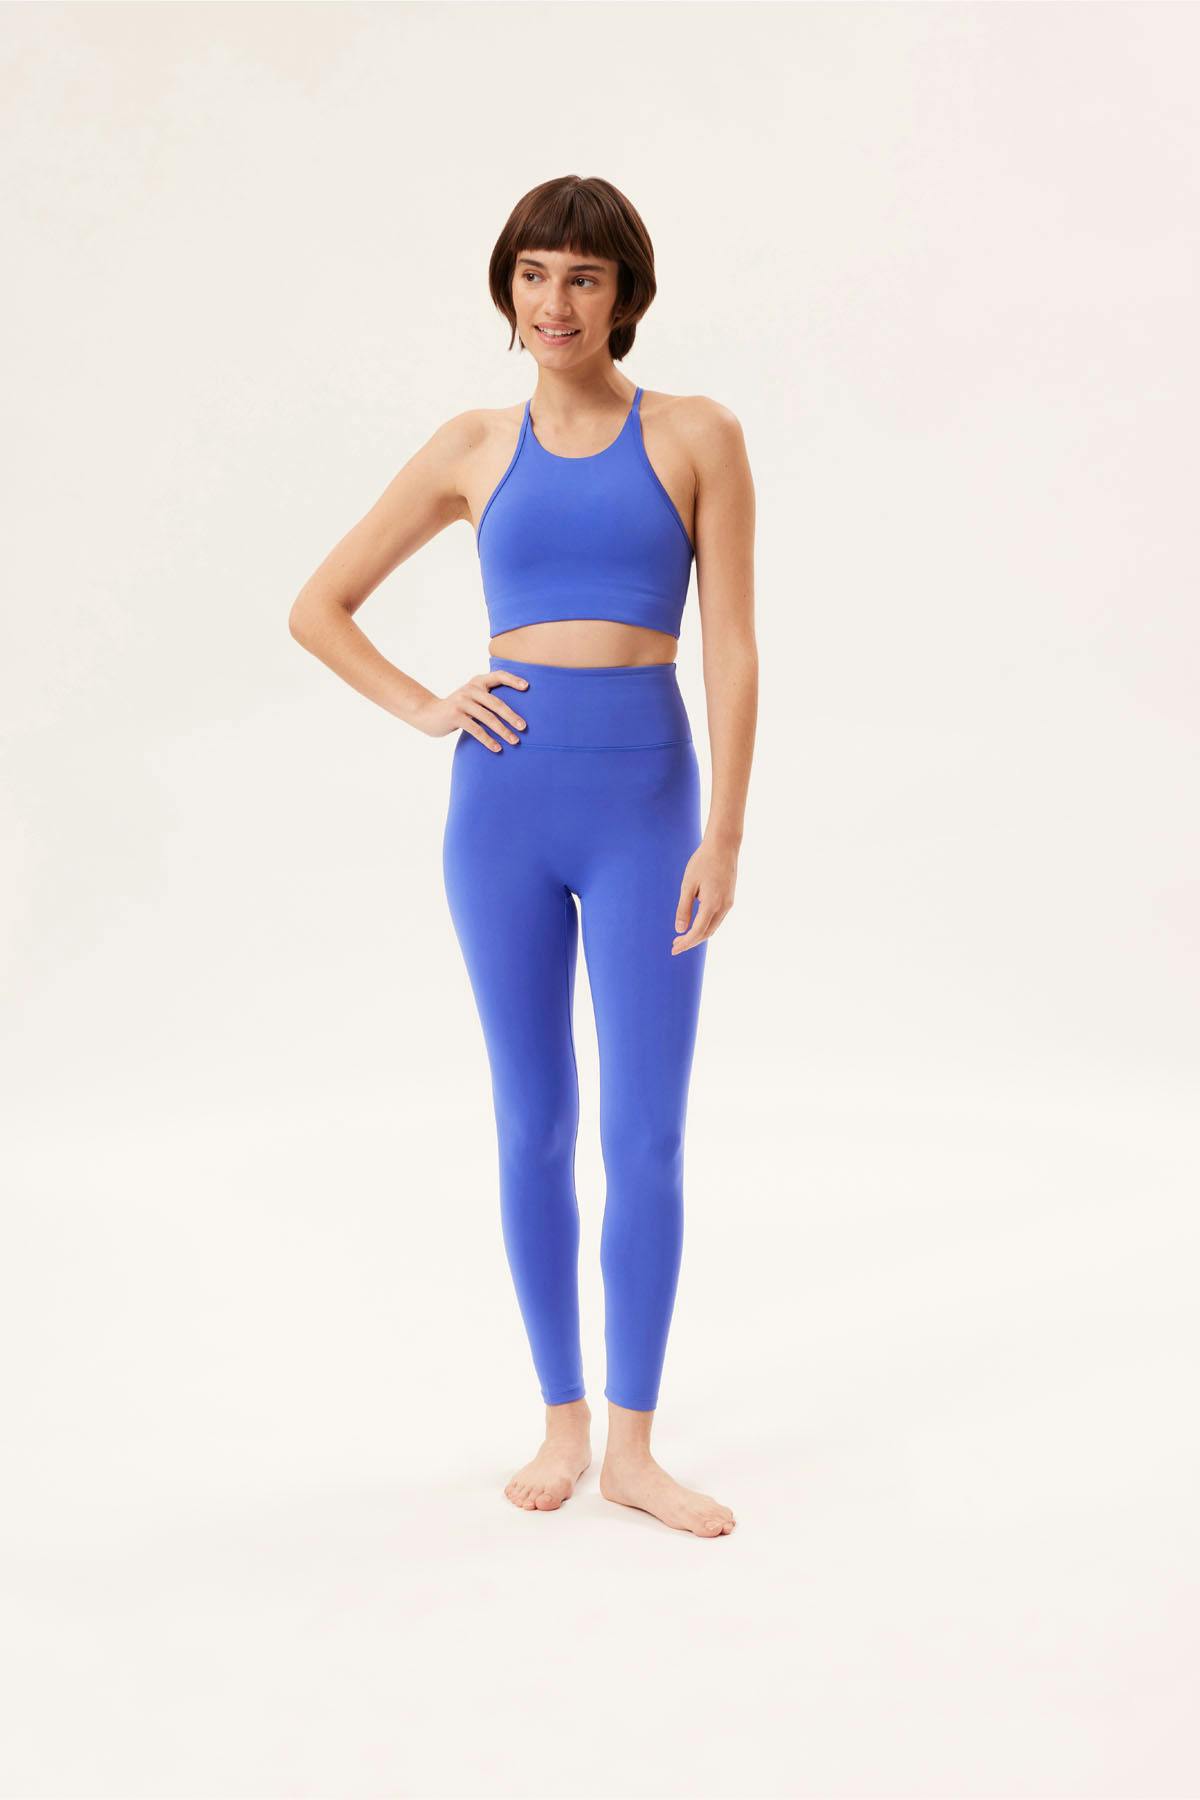 Water Lily Cloud Pant — Girlfriend Collective